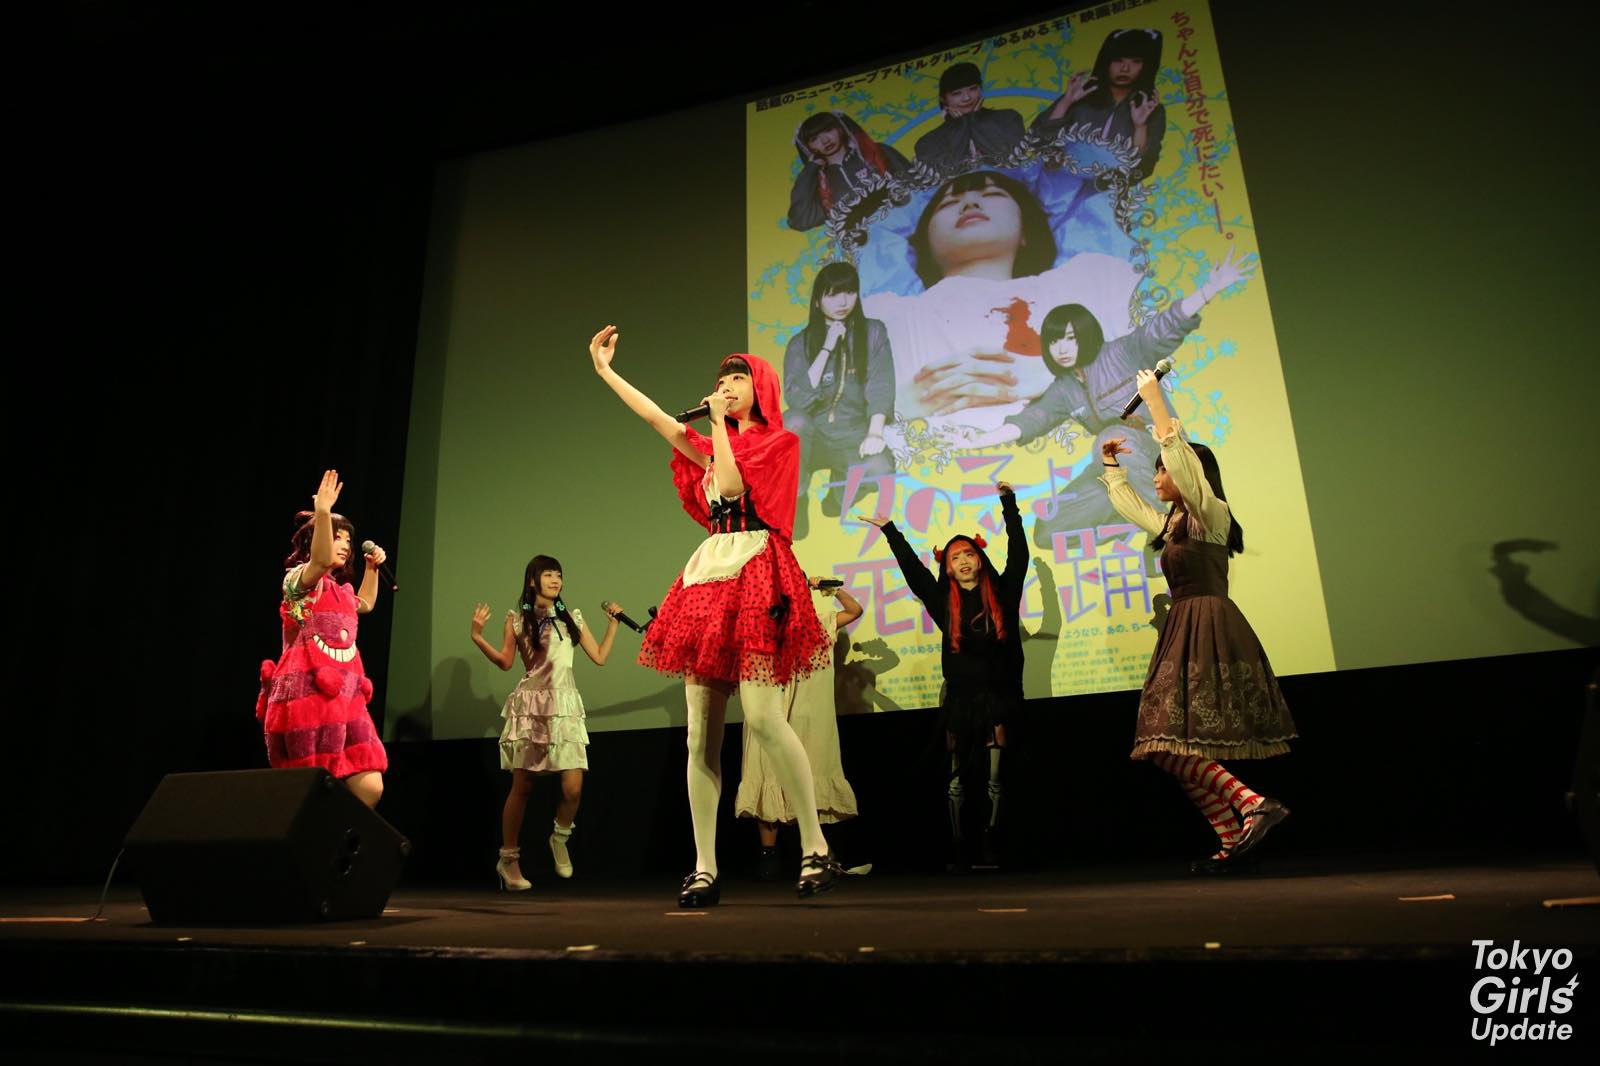 Yurumerumo! Hold a Live For Ghostly Audience at Movie Premiere!